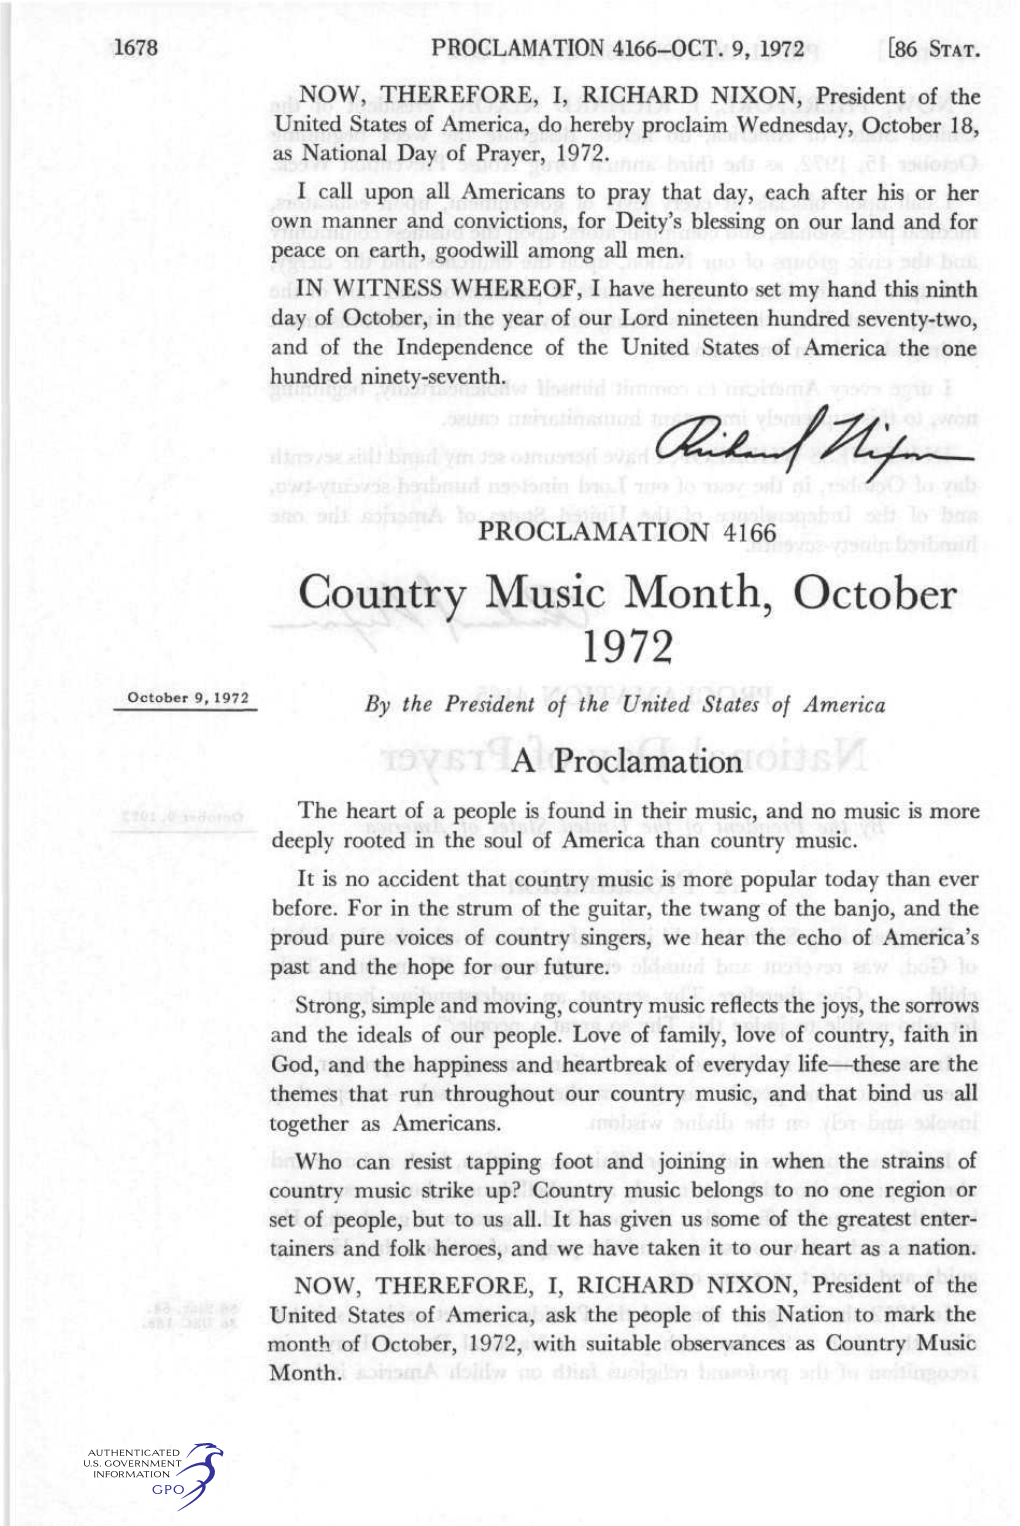 Country Music Month, October 1972